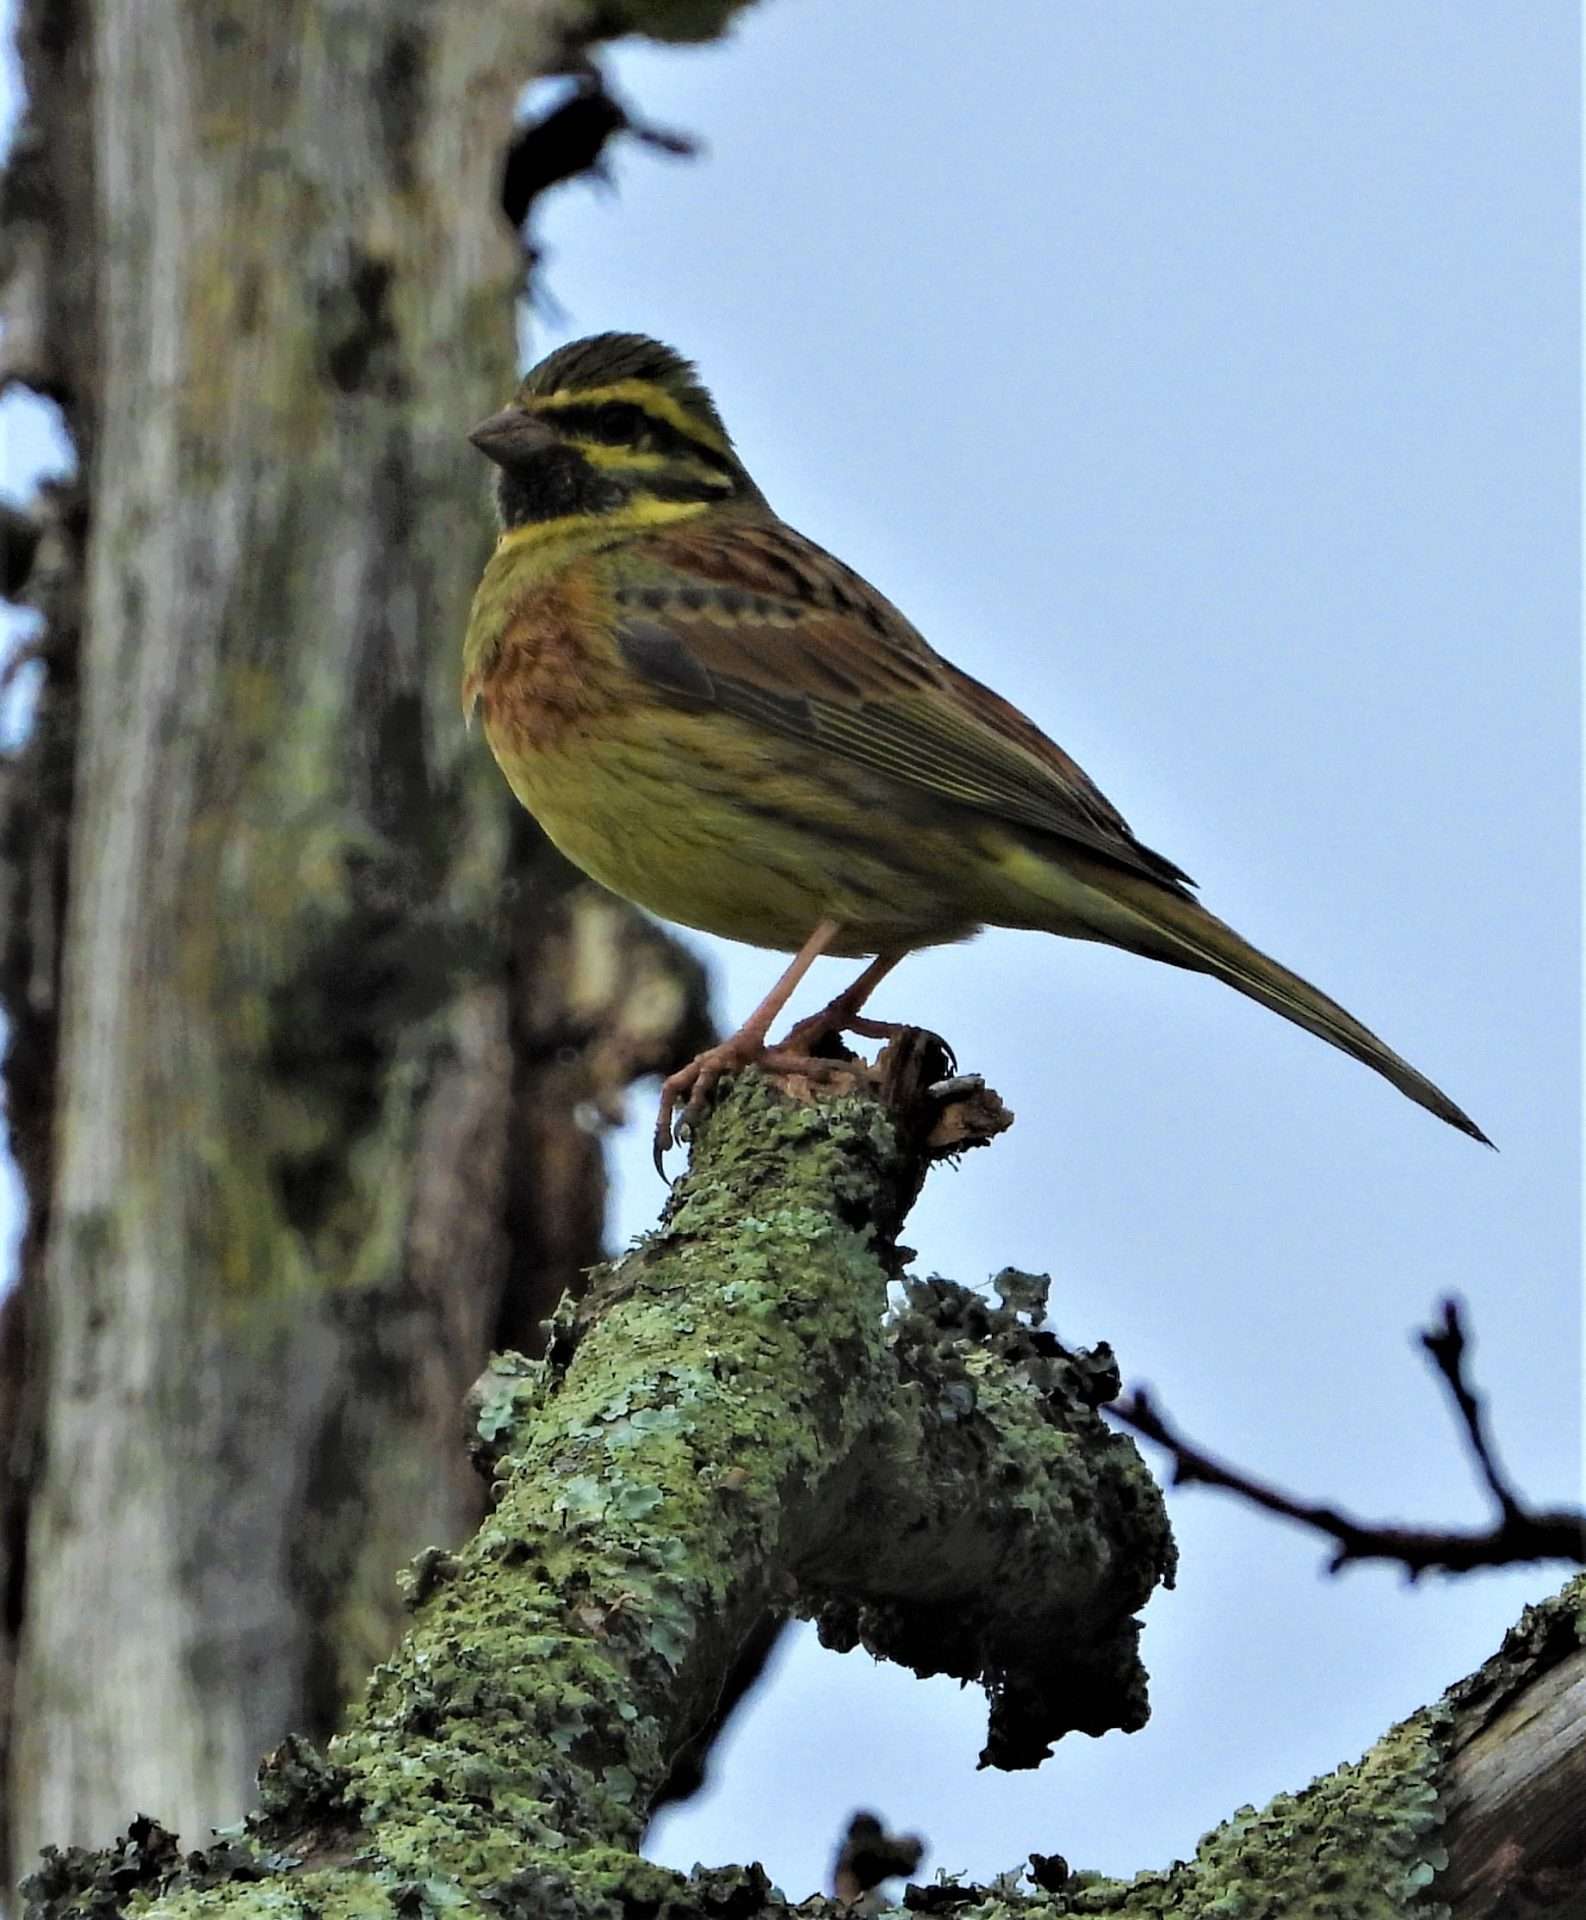 Cirl Bunting by Kenneth Bradley at Combe cellars